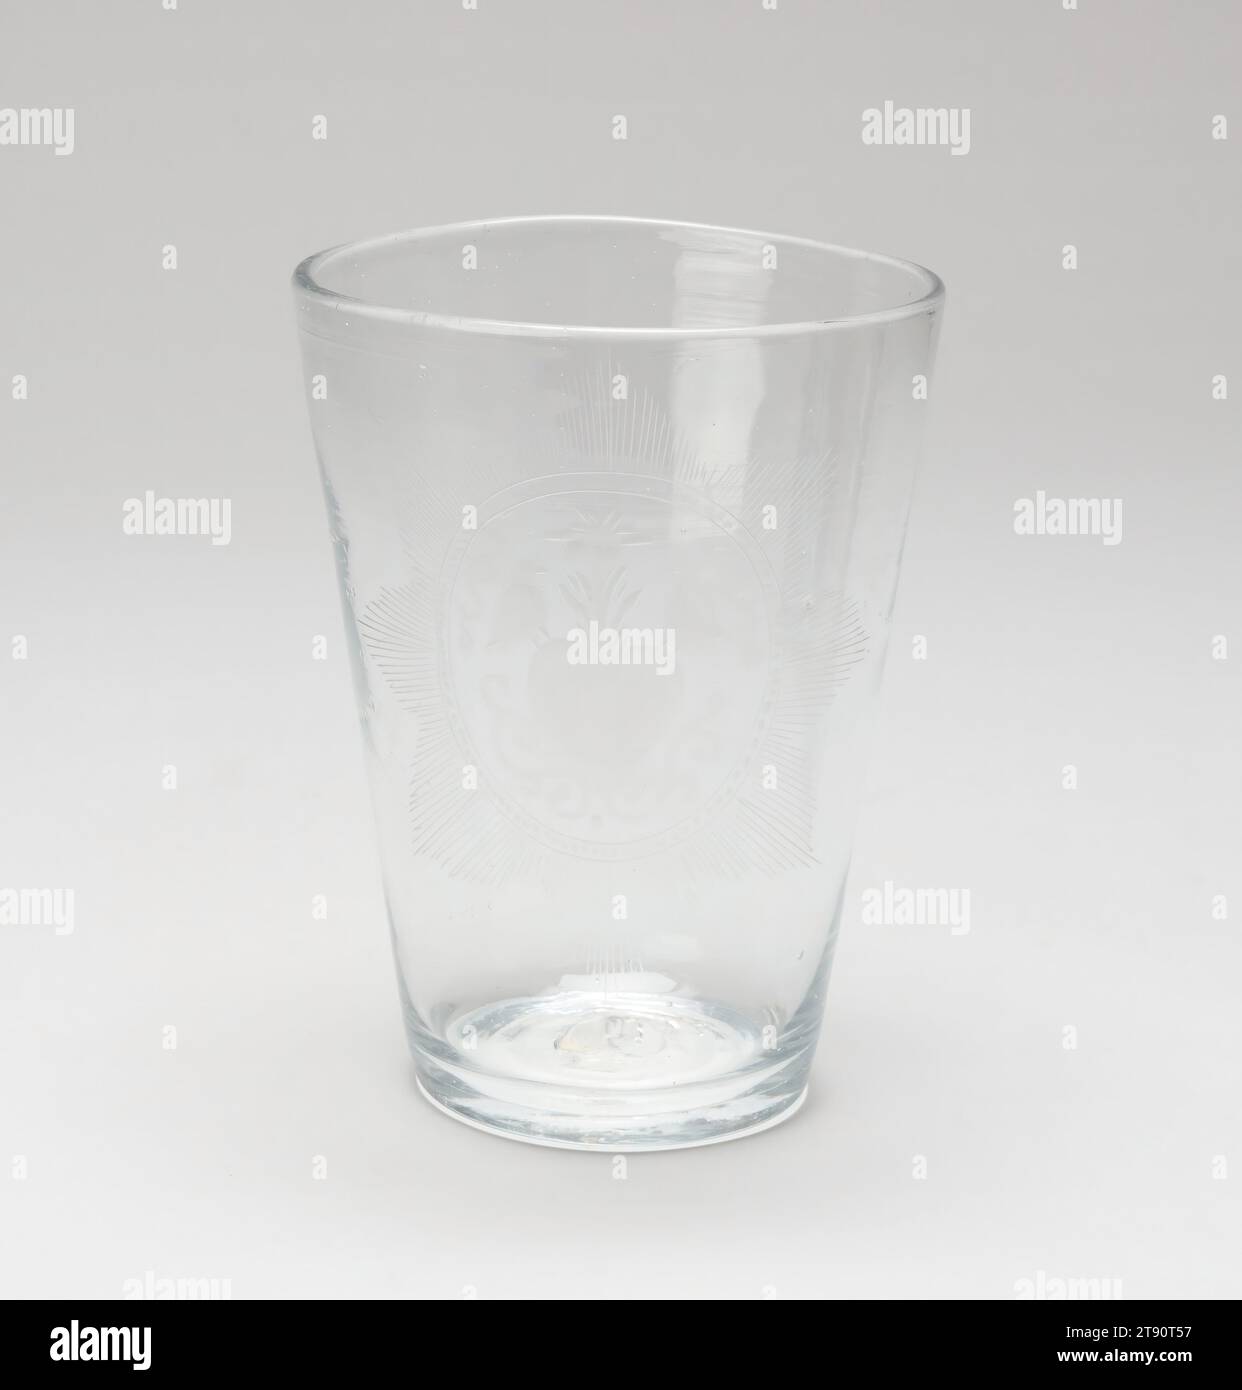 Water glass, 18th-19th century, 6 3/4 x 5 x 5in. (17.1 x 12.7 x 12.7cm), Glass, United States, 18th-19th century Stock Photo